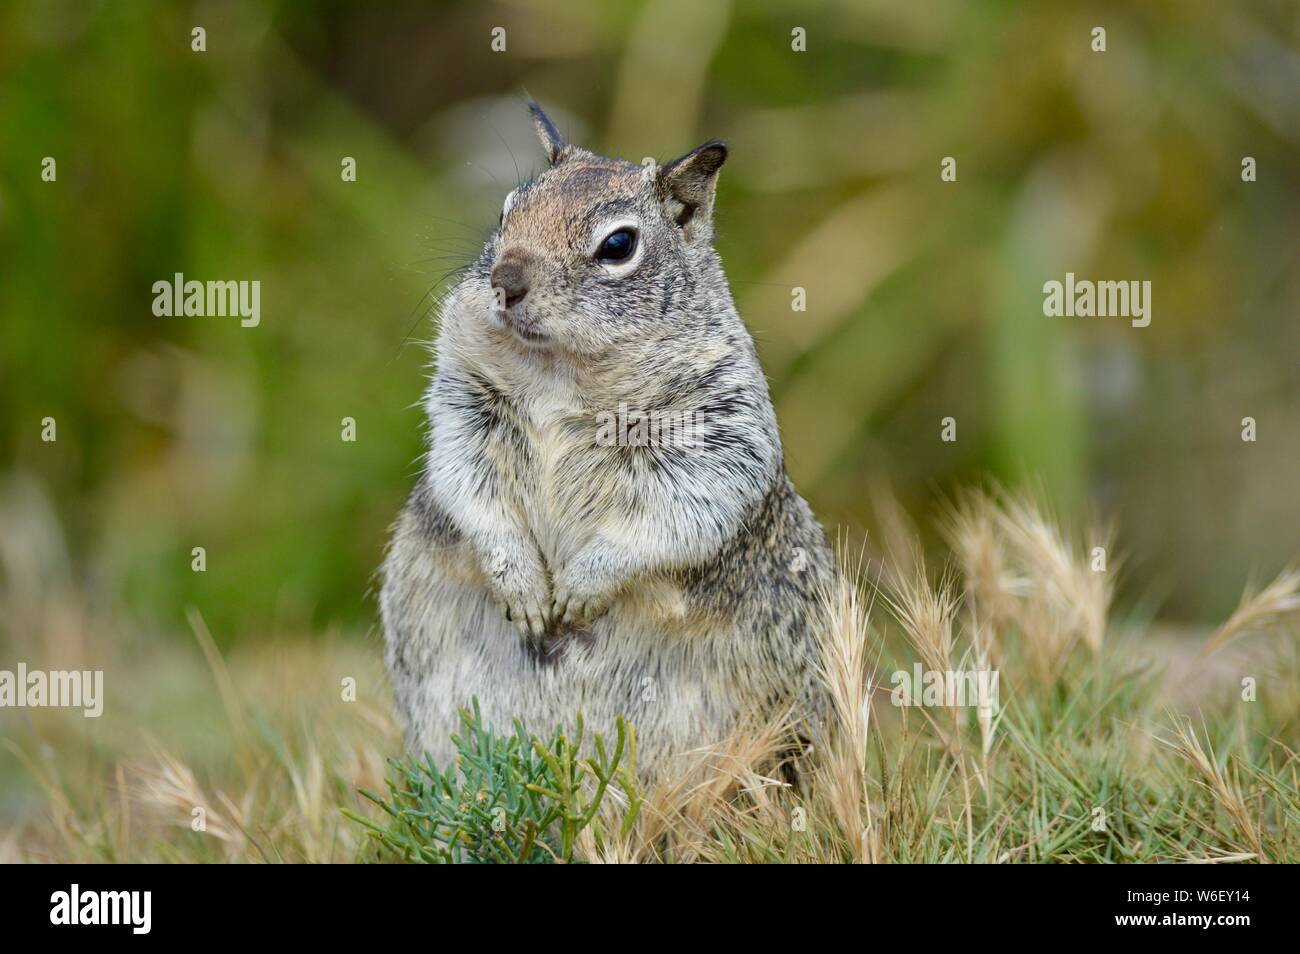 cute little squirrel watching out Stock Photo